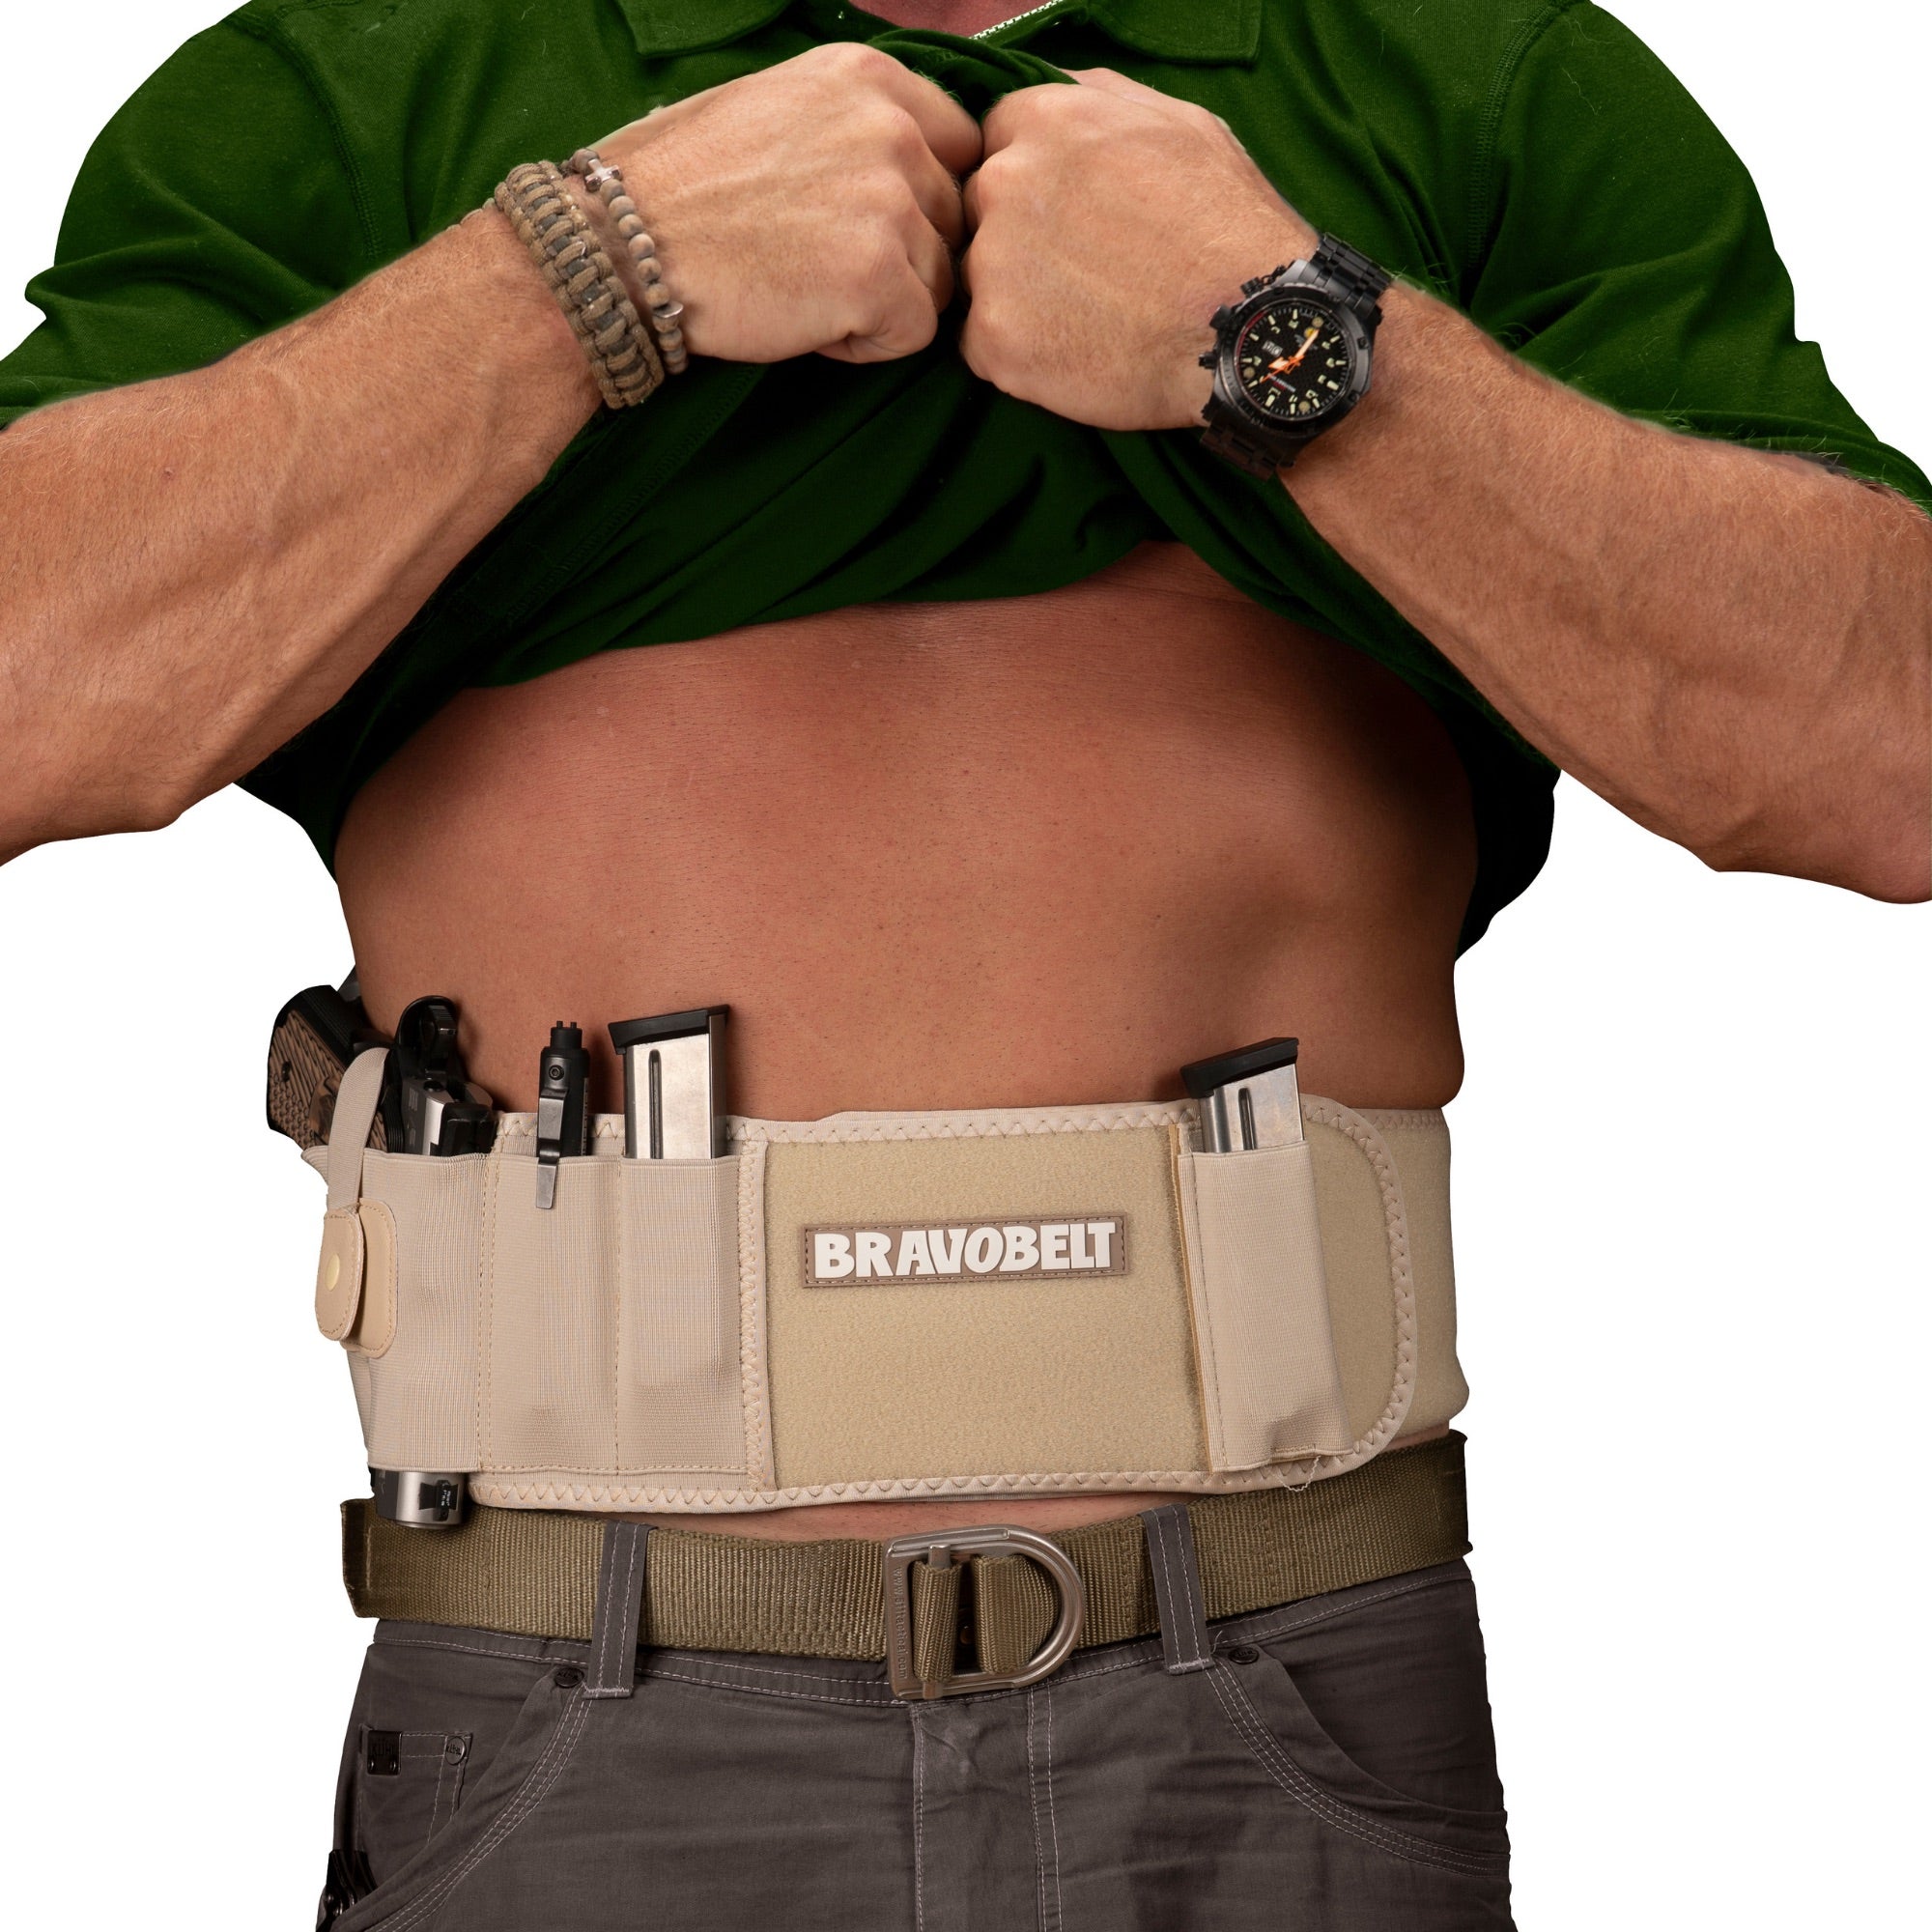  XL Belly Band Holster for Concealed Carry Up to 54, Combat  Veteran Owned Company, IWB Holster, Waist Band Handgun Carrying System